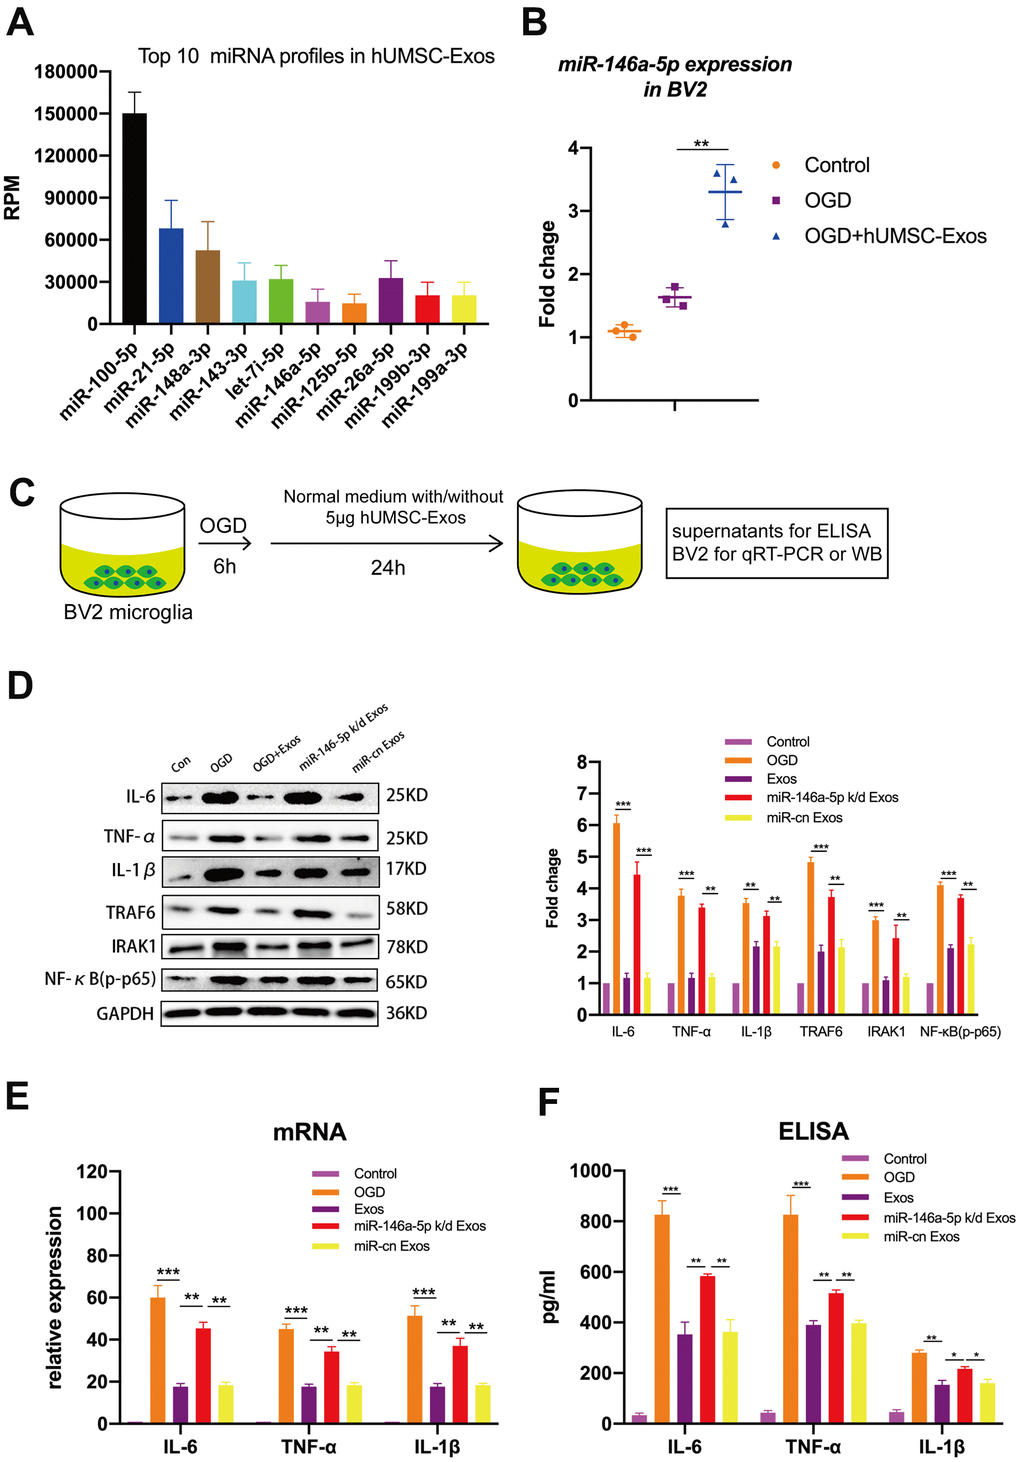 Exosomal miR-146a-5p decreases microglial pro-inflammatory activity by suppressing the IRAK1/TRAF6 signaling pathway in vitro. (A) Expression levels of the top ten hUMSC-Exosomal miRNAs, including MiR-146a-5p. (B) After post-OGD exposure to hUMSC-Exos, BV2 microglia exhibited significantly increased miR-146a-5p content. Data were normalized to levels of U6. (C) In vitro experimental scheme. (D) Expression of pro-inflammatory cytokines IL-6, TNF-α, and IL-1β, as well as signaling pathway IRAK1, TRAF6, and NFκB (p65) in microglia treated with wild-type versus miR-146a-5p knockdown hUMSC-Exos. (E) Determination of IL-6, TNF-α, and IL-1β mRNA levels via qRT-PCR. (F) Determination of supernatant IL-6, TNF-α, and IL-1β protein levels via ELISA. Data are expressed as mean ± SEM. (A–F) Each experiment is representative of n = 3 per group. Significant differences are indicated (*p 